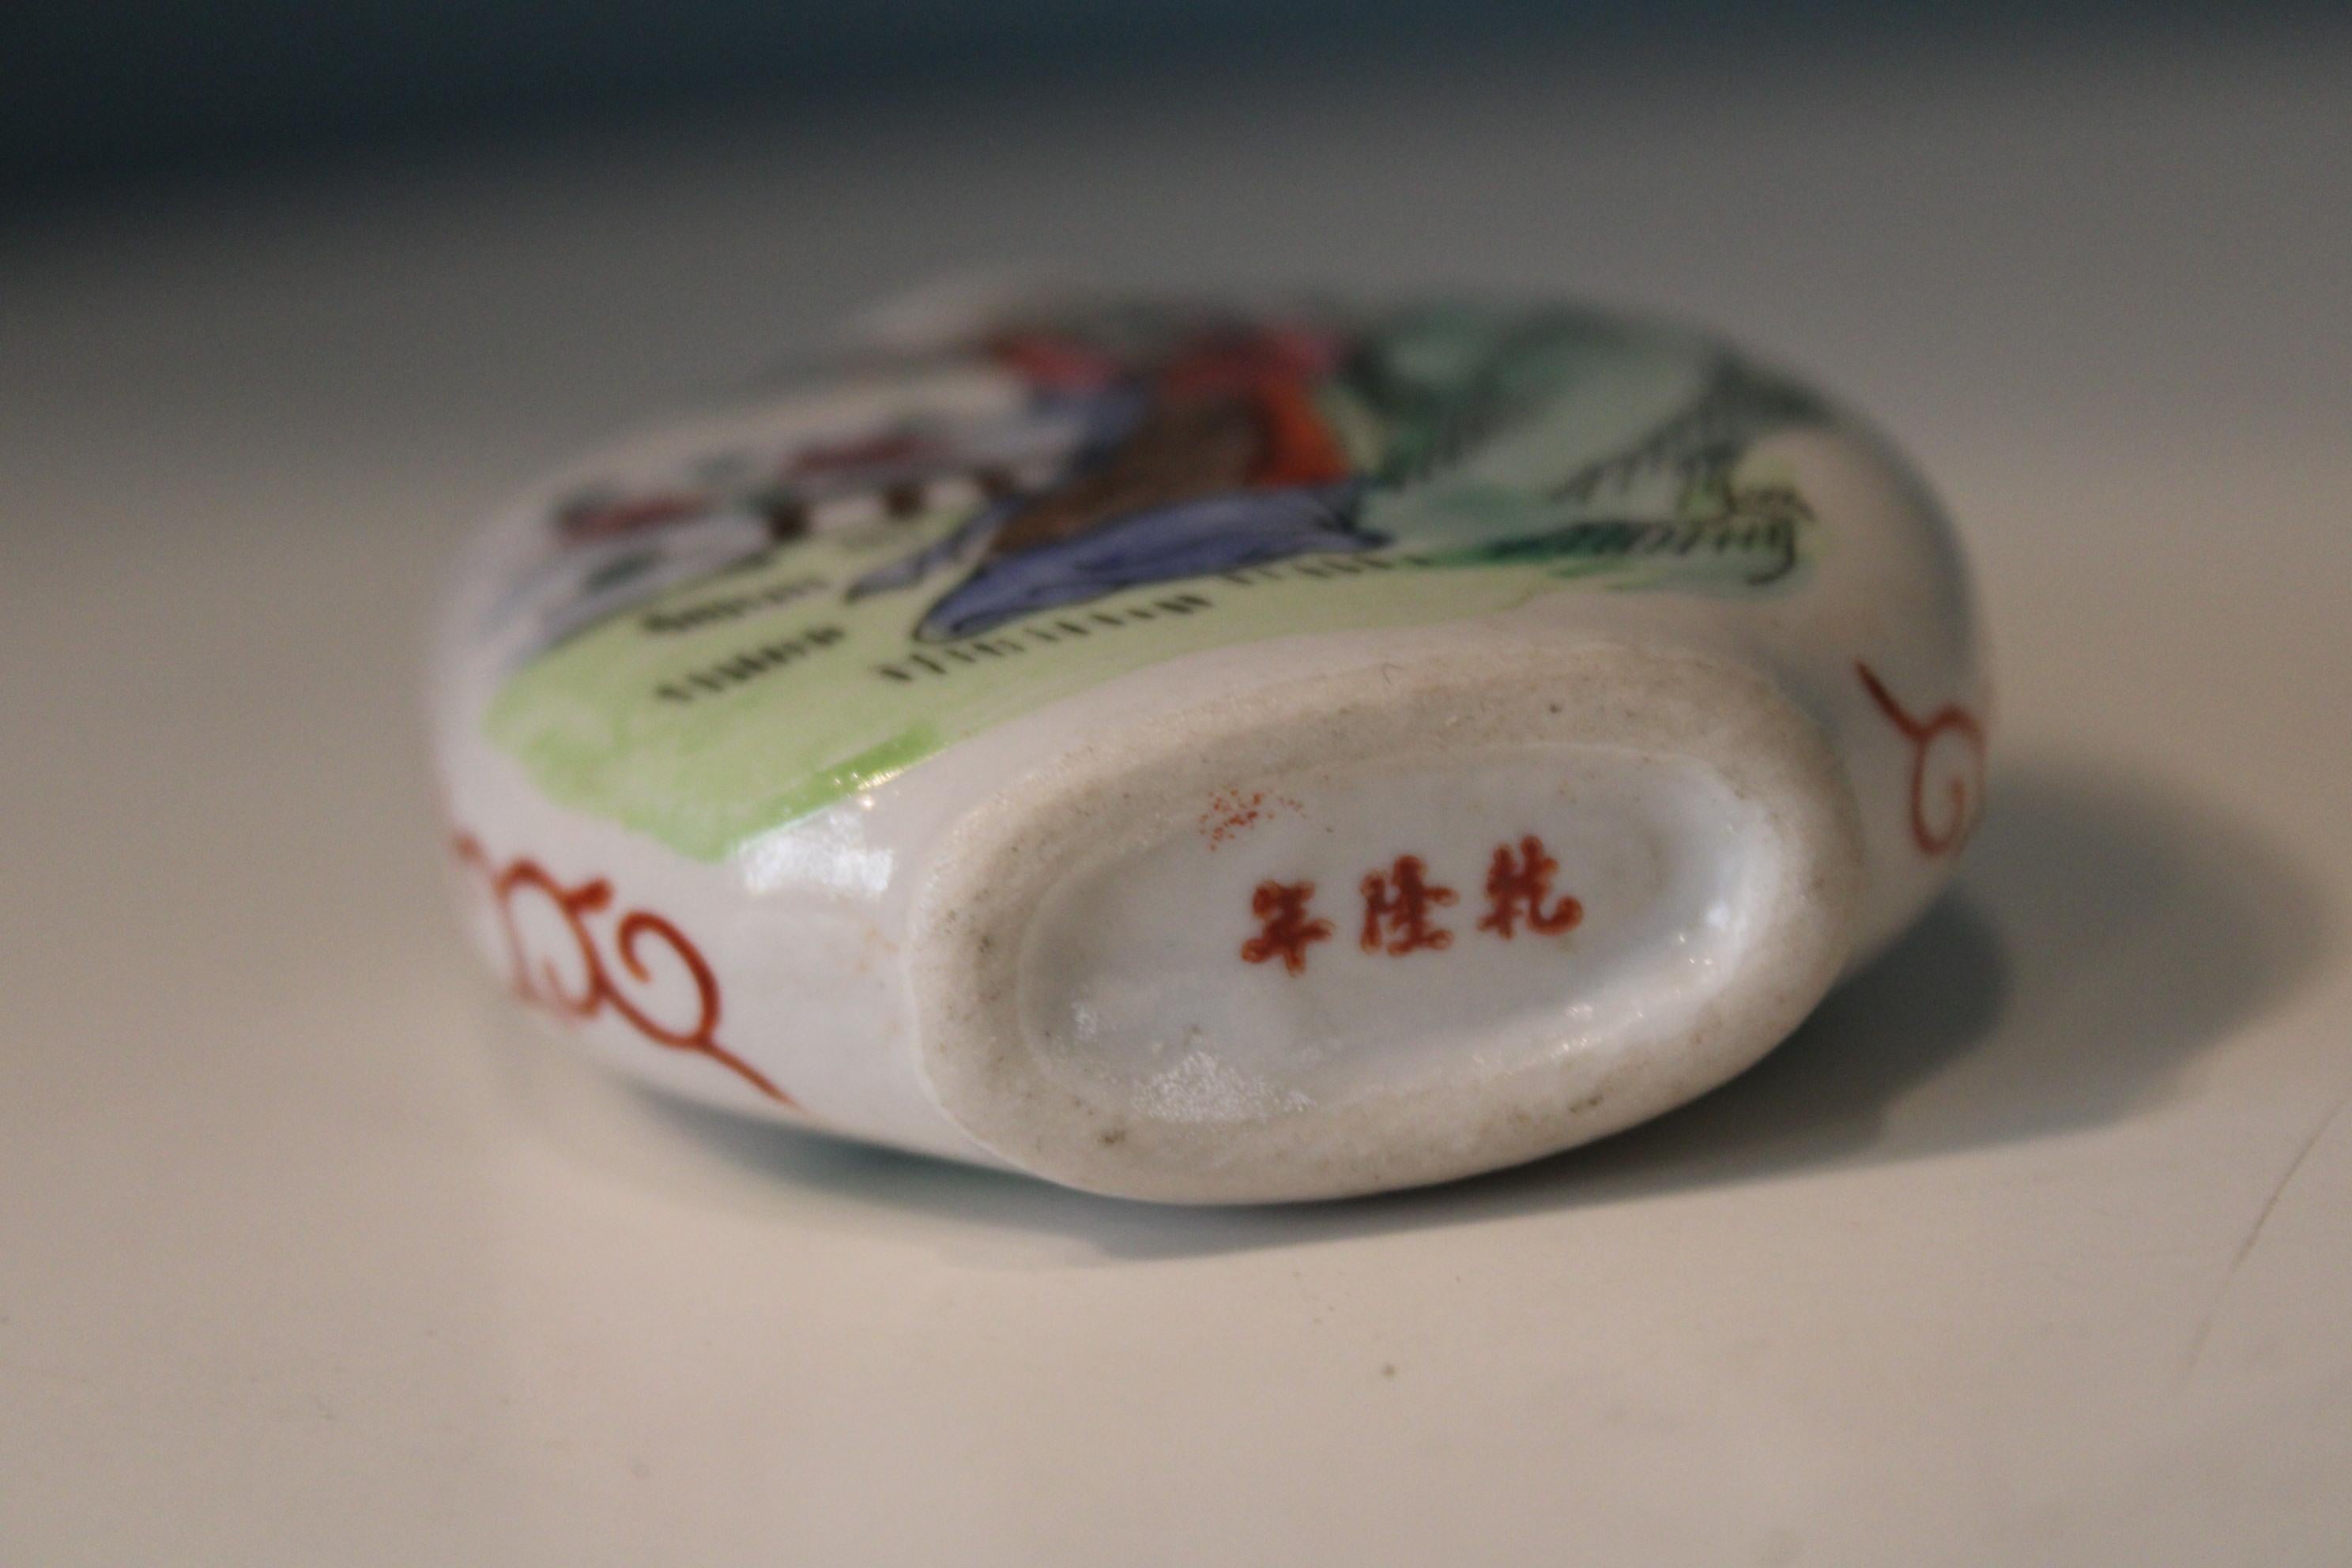 Porcelain Chinese Snuff Bottle 4